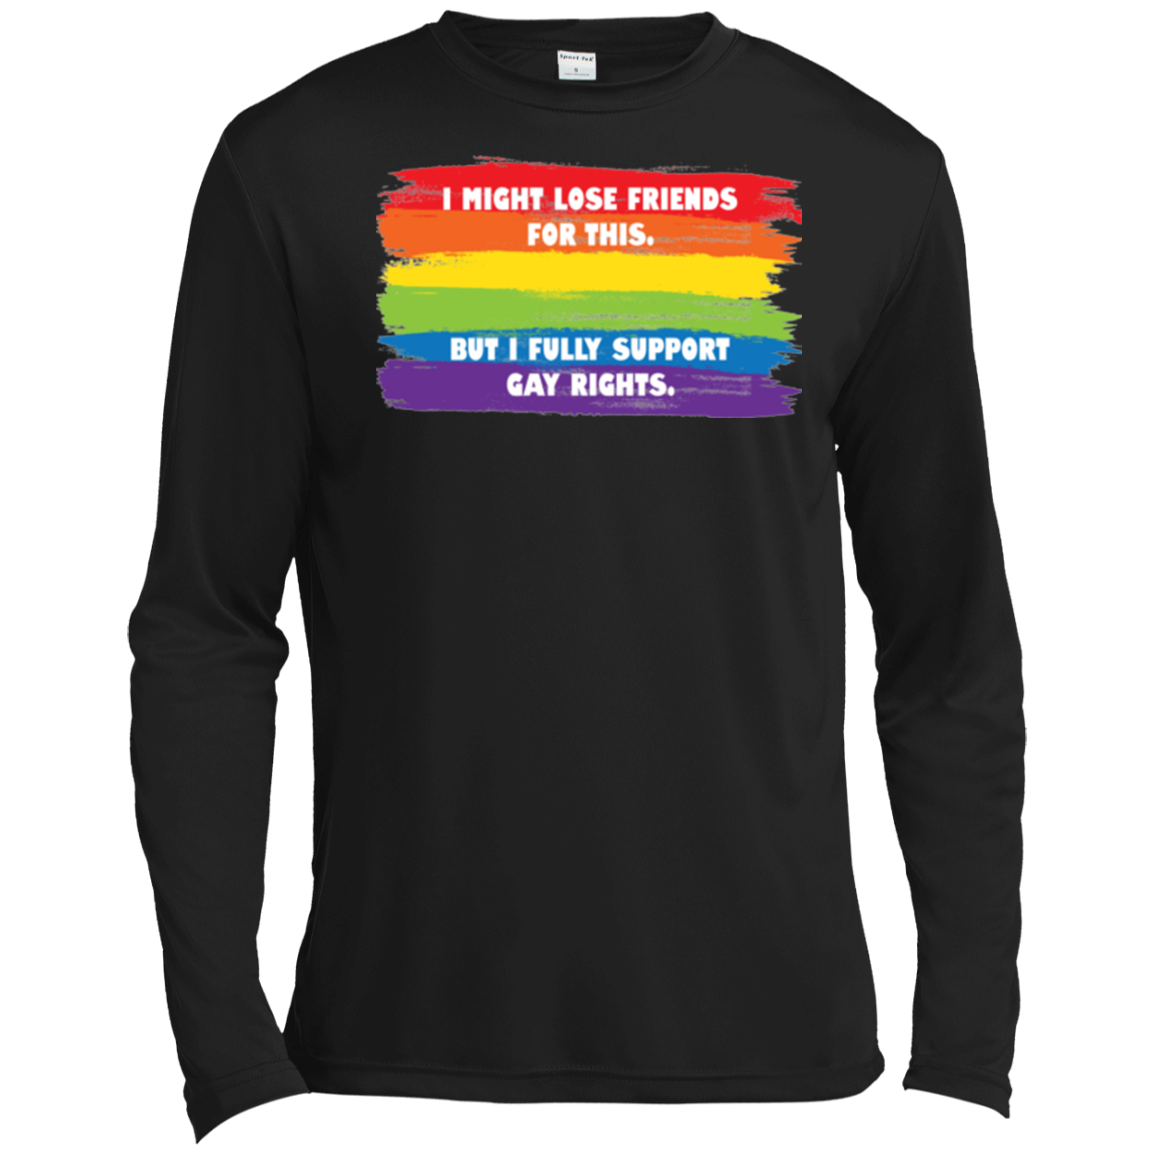 I Might Lose Friends For This But I Fully Support Gay Rights T Shirt